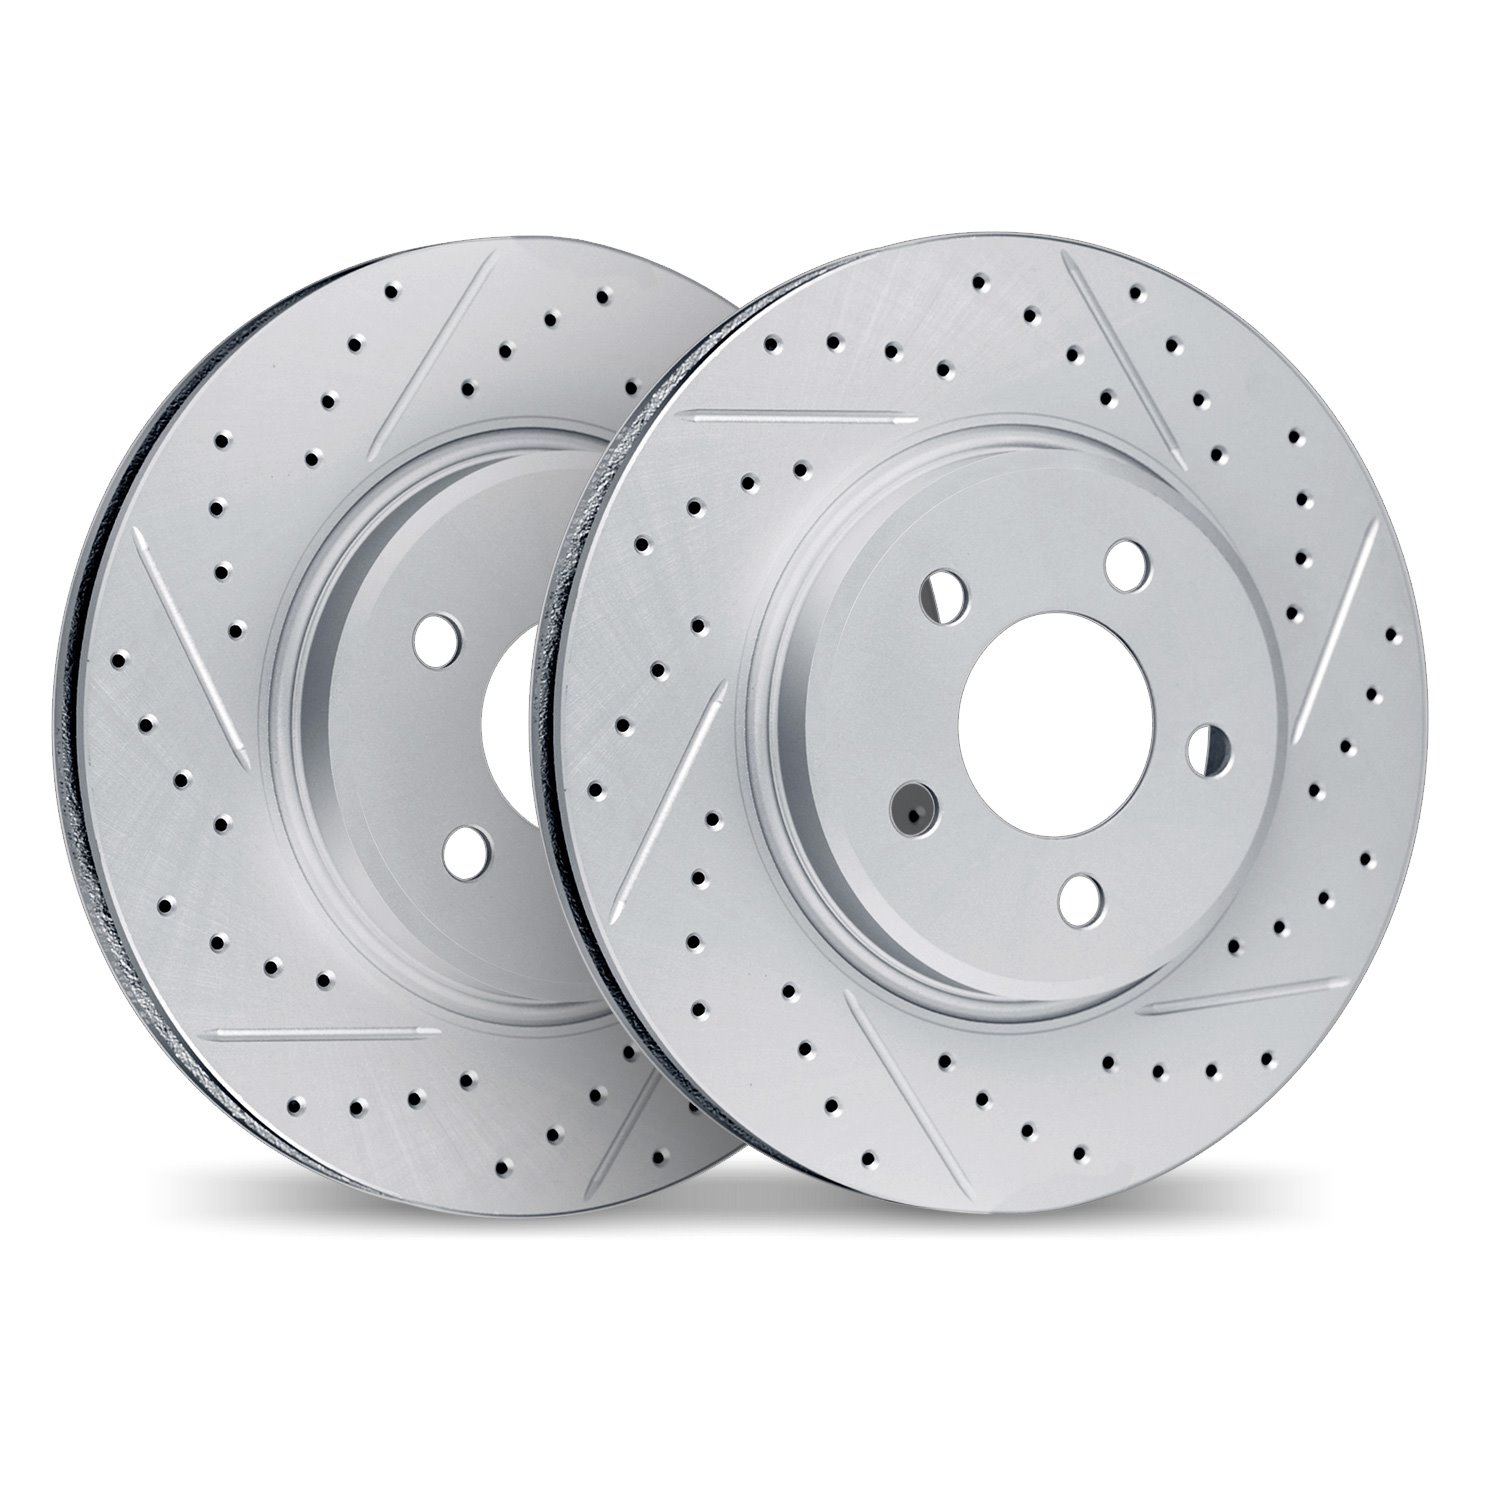 2002-54171 Geoperformance Drilled/Slotted Brake Rotors, 2010-2011 Ford/Lincoln/Mercury/Mazda, Position: Rear